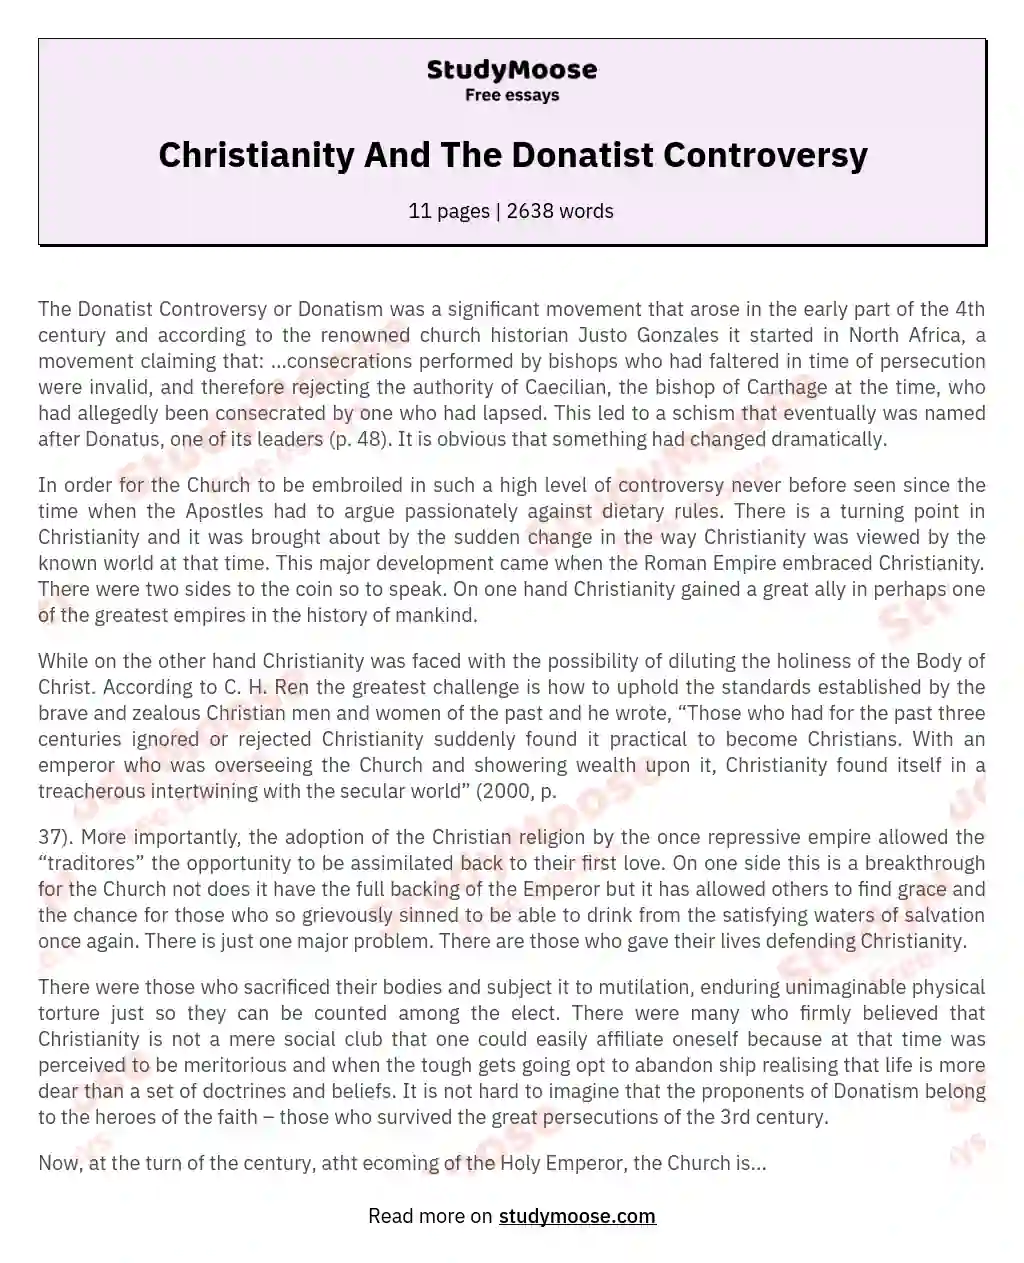 Christianity And The Donatist Controversy essay